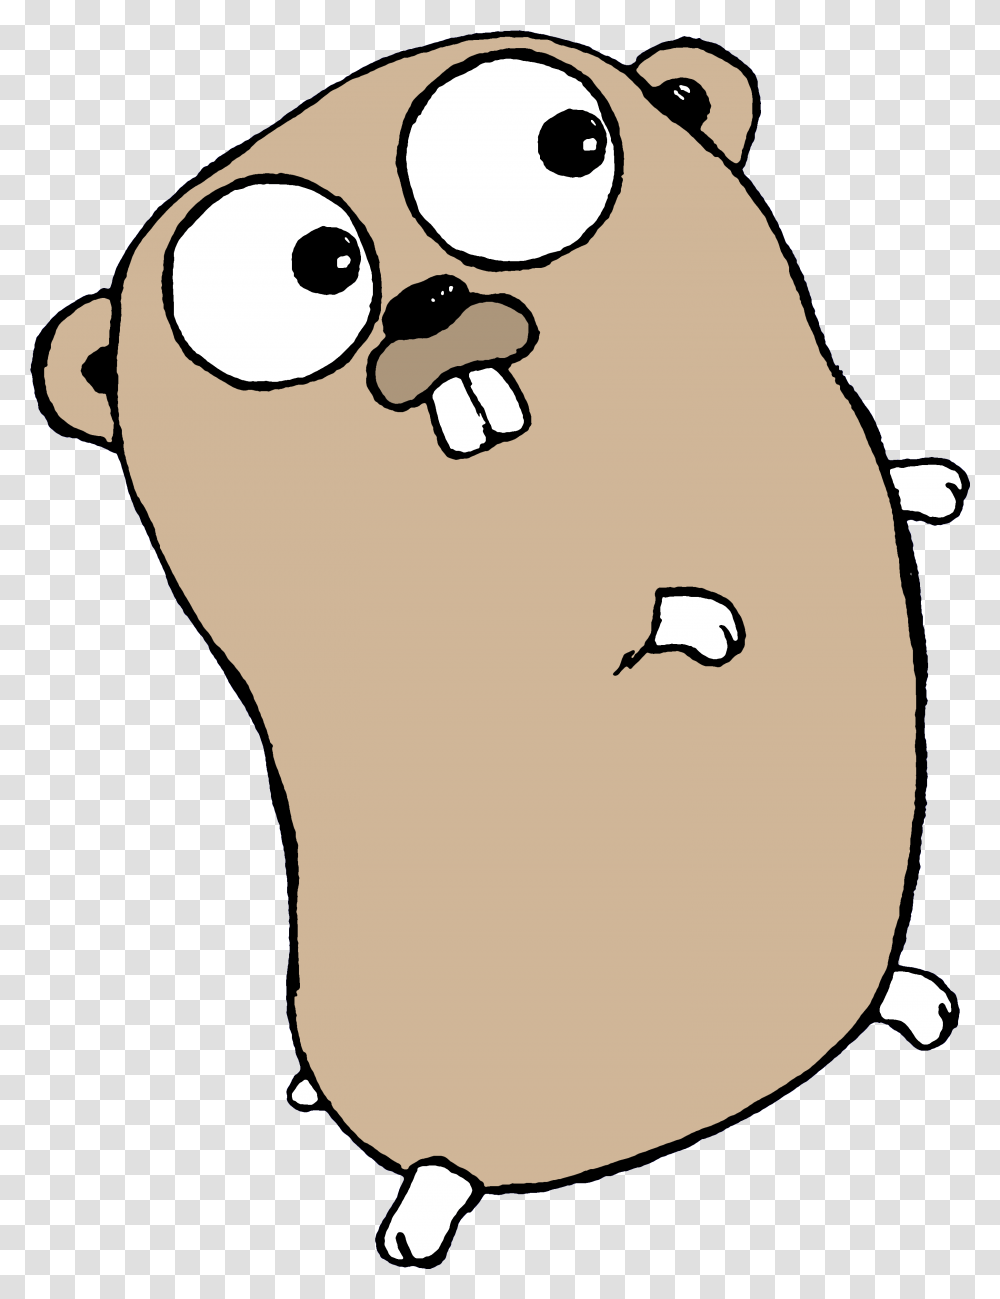 Index Of Zhgdgdesigntech Logos Gen By Gen4idxpy V13 Gopher Cartoon, Toe, Hand, Teeth, Mouth Transparent Png